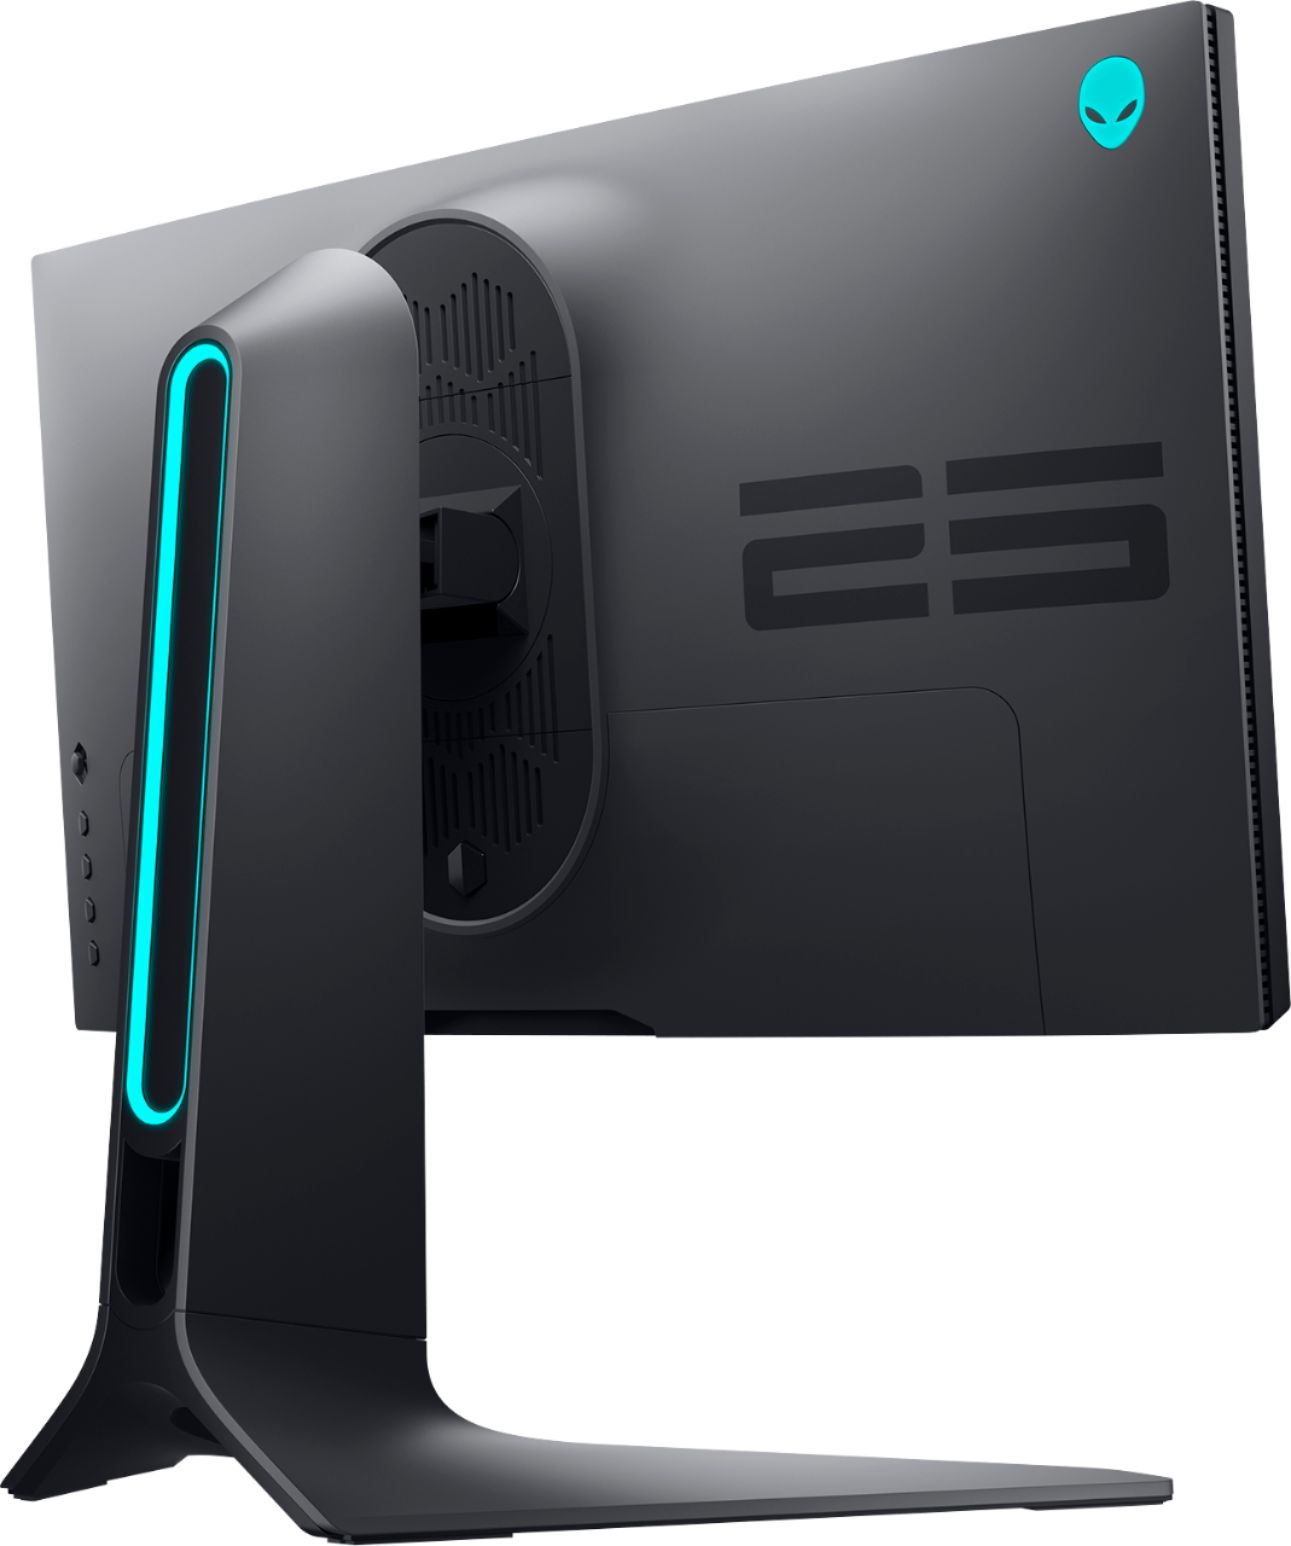 Best Buy: Alienware AW2521H 25 IPS LED FHD G-SYNC Gaming Monitor